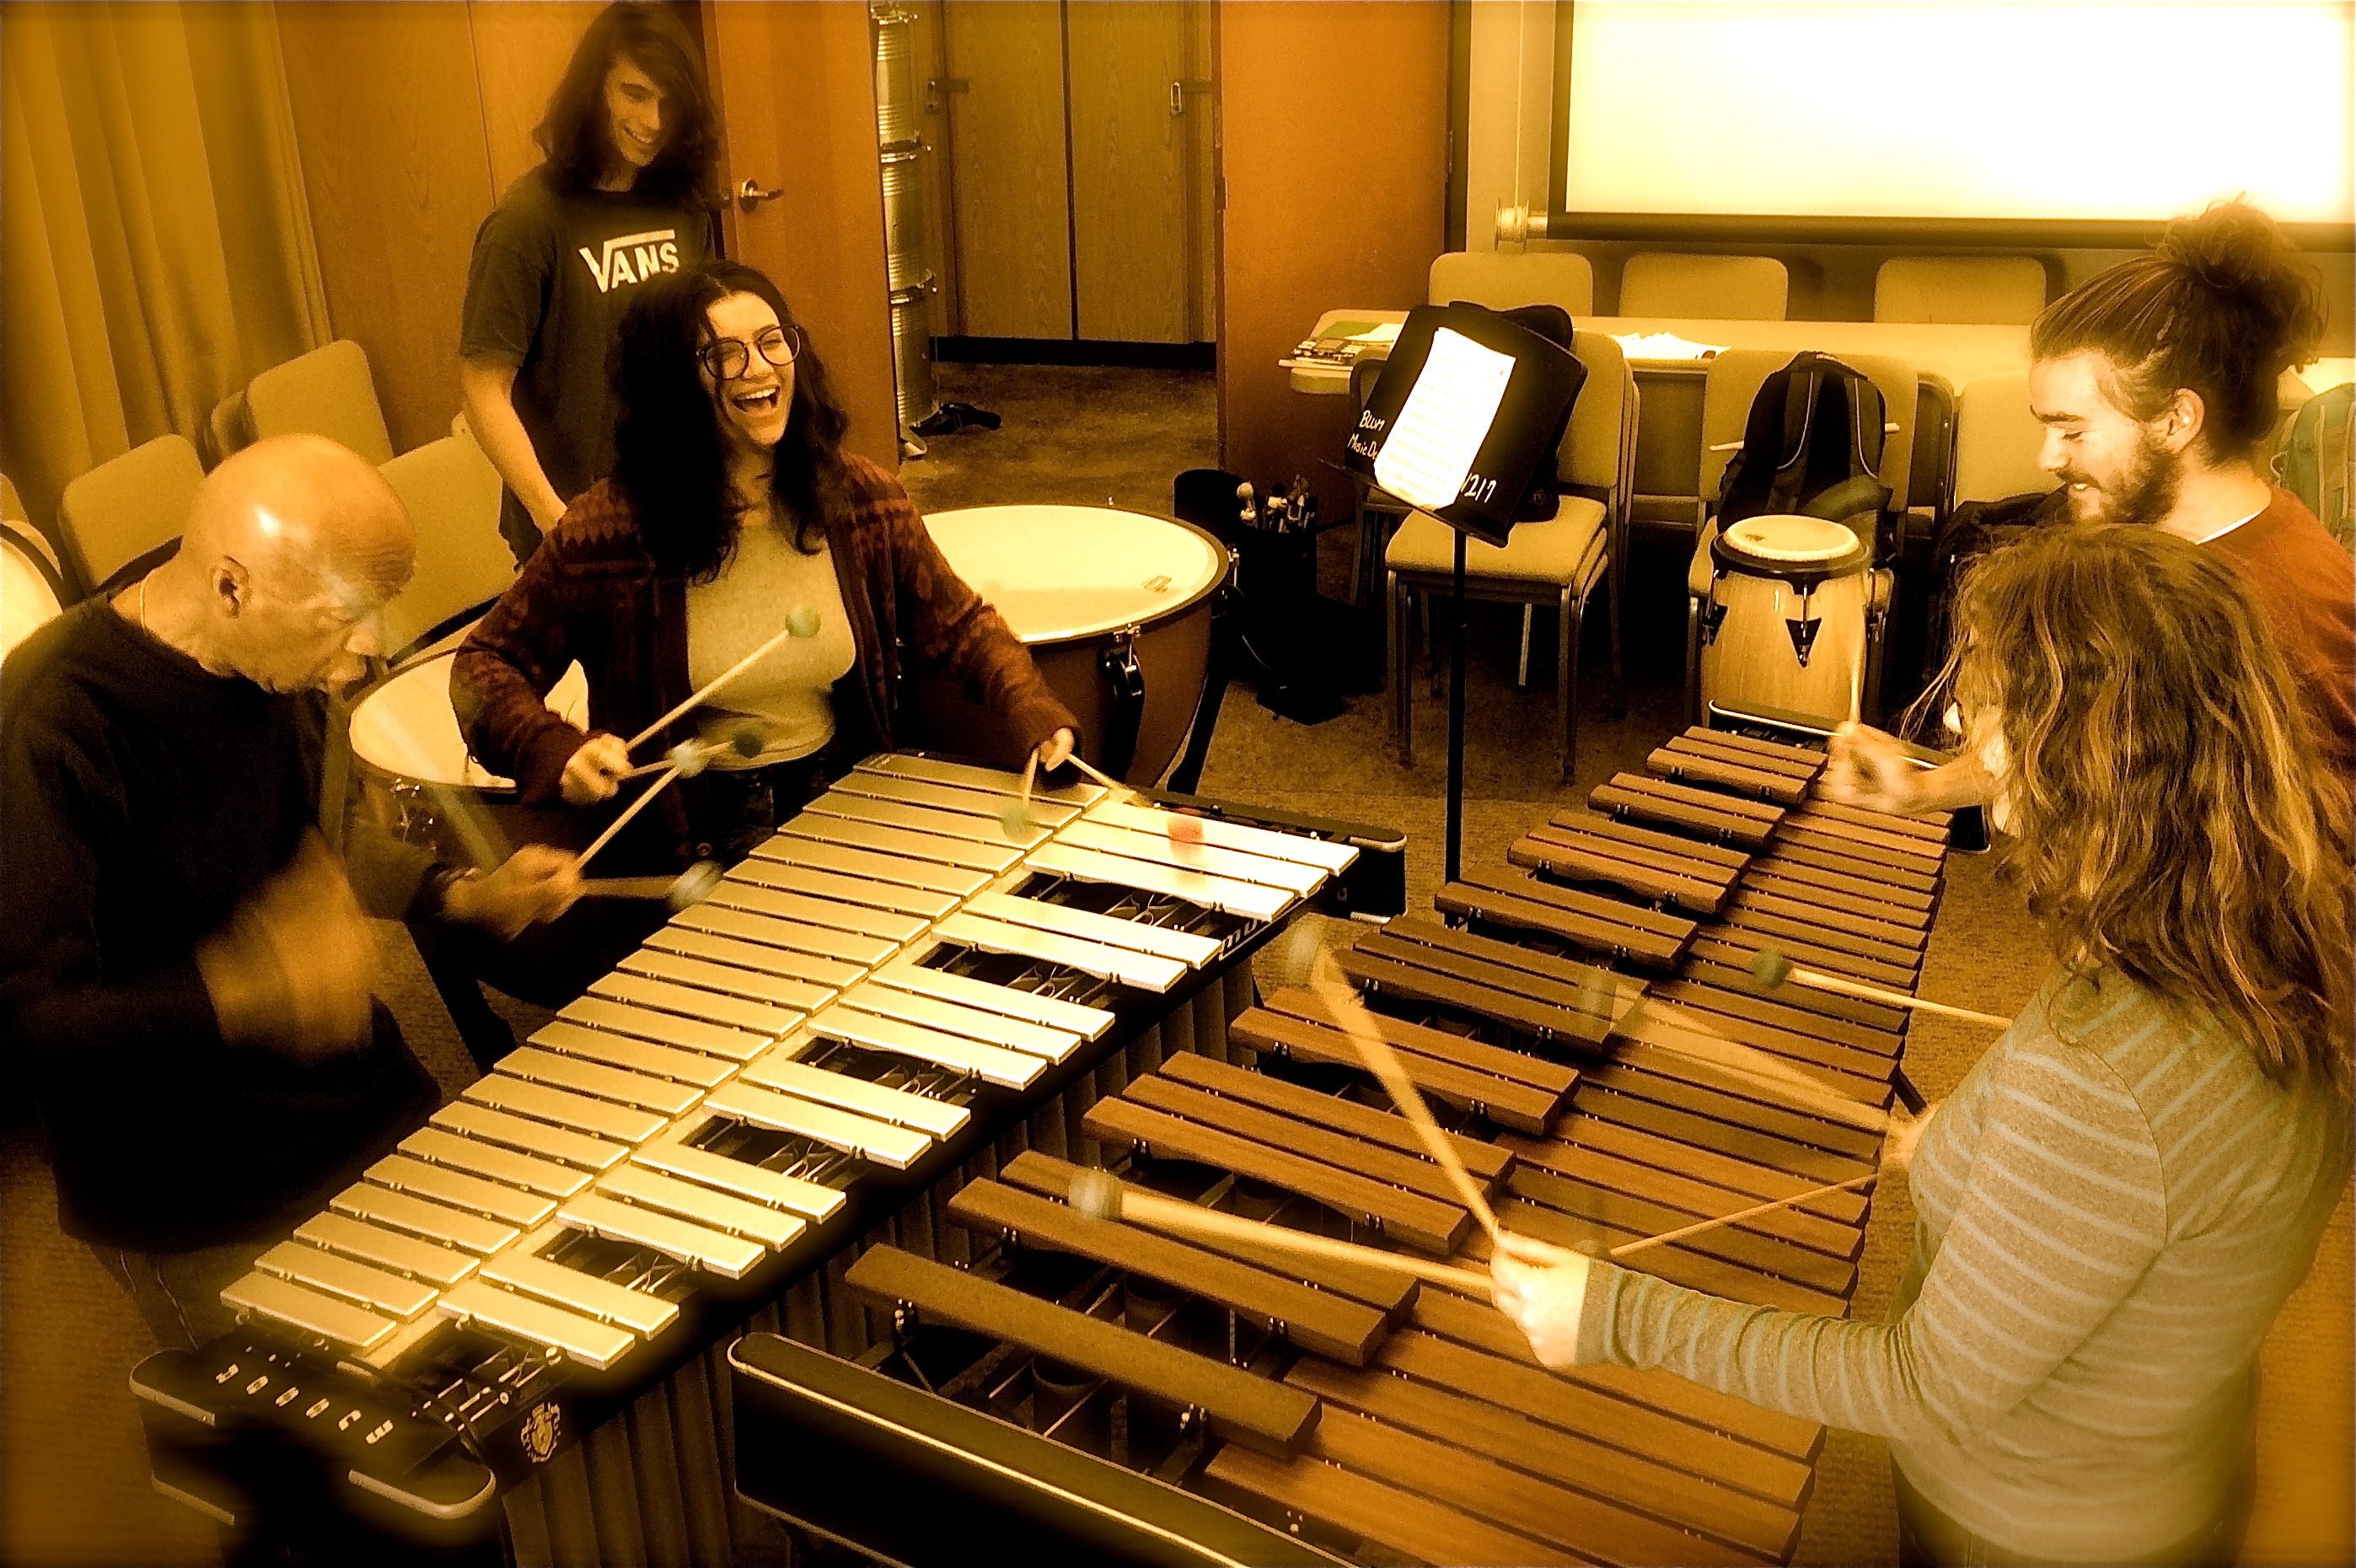 The Bard Percussion Ensemble and &quot;Take 3&quot; featuring Avalon Packer, Isaac Pincus and Thurman Barker performing original music.